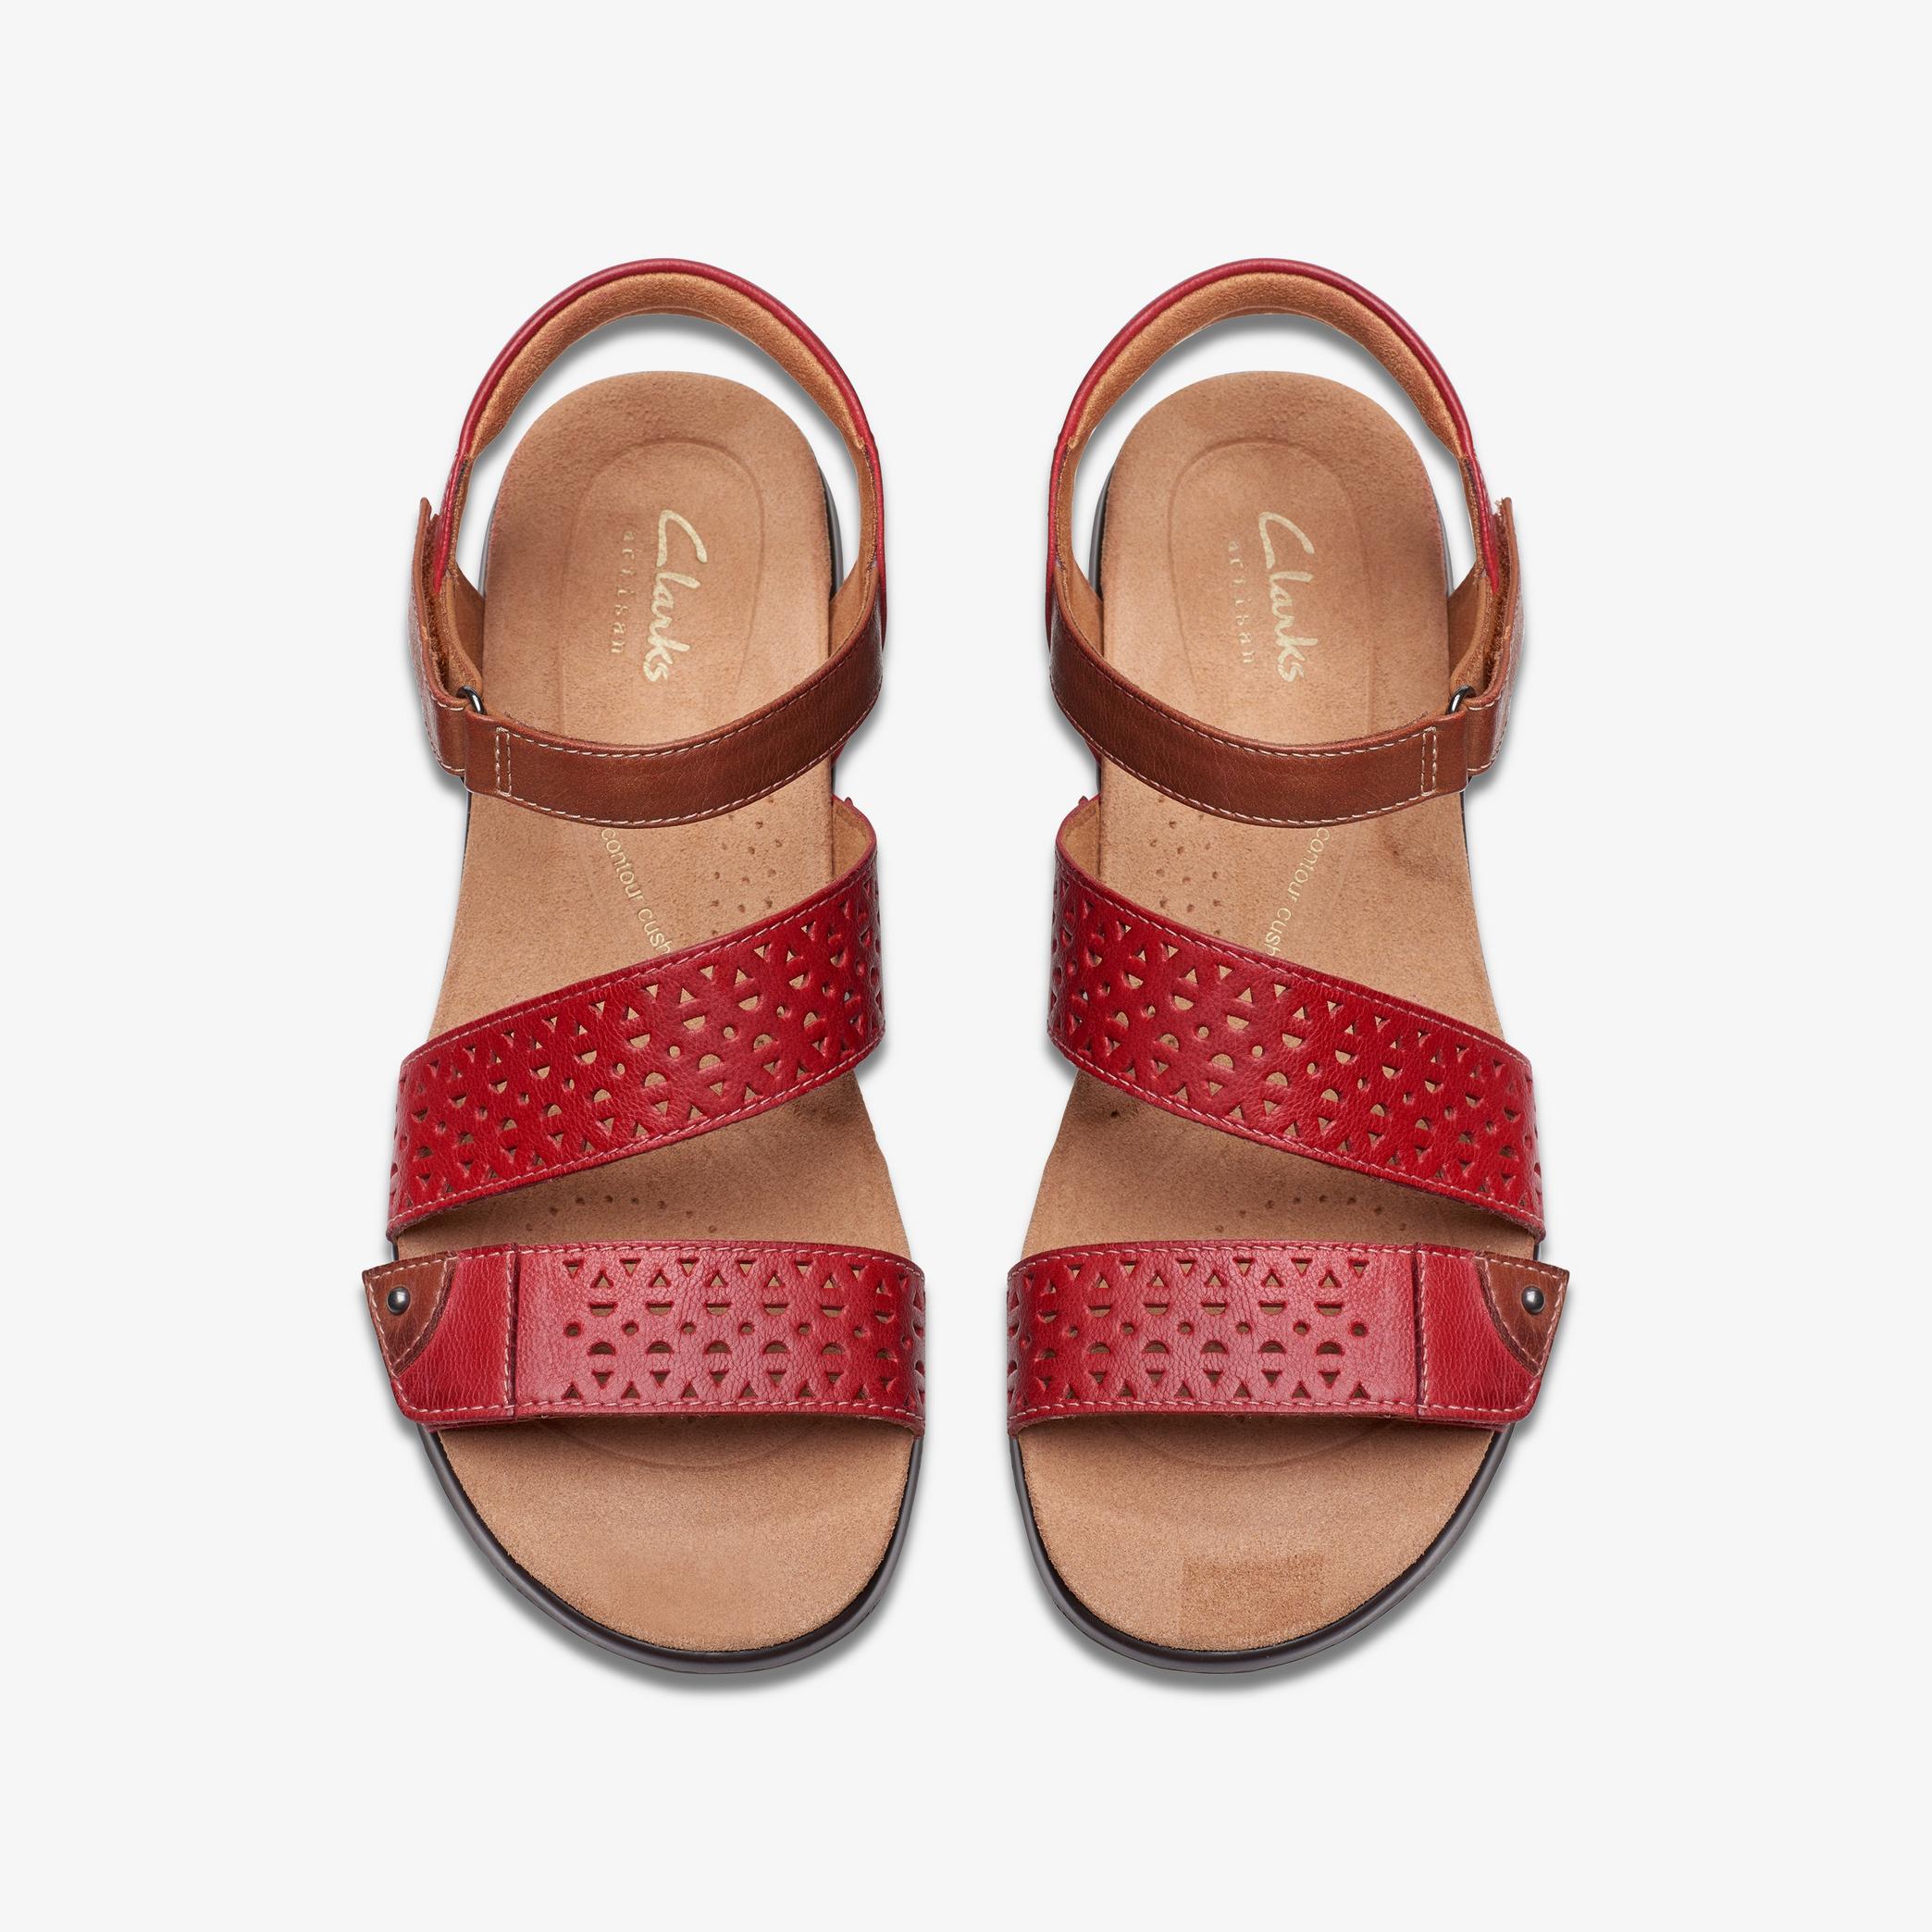 Kitly Way Cherry Leather Flat Sandals, view 6 of 6